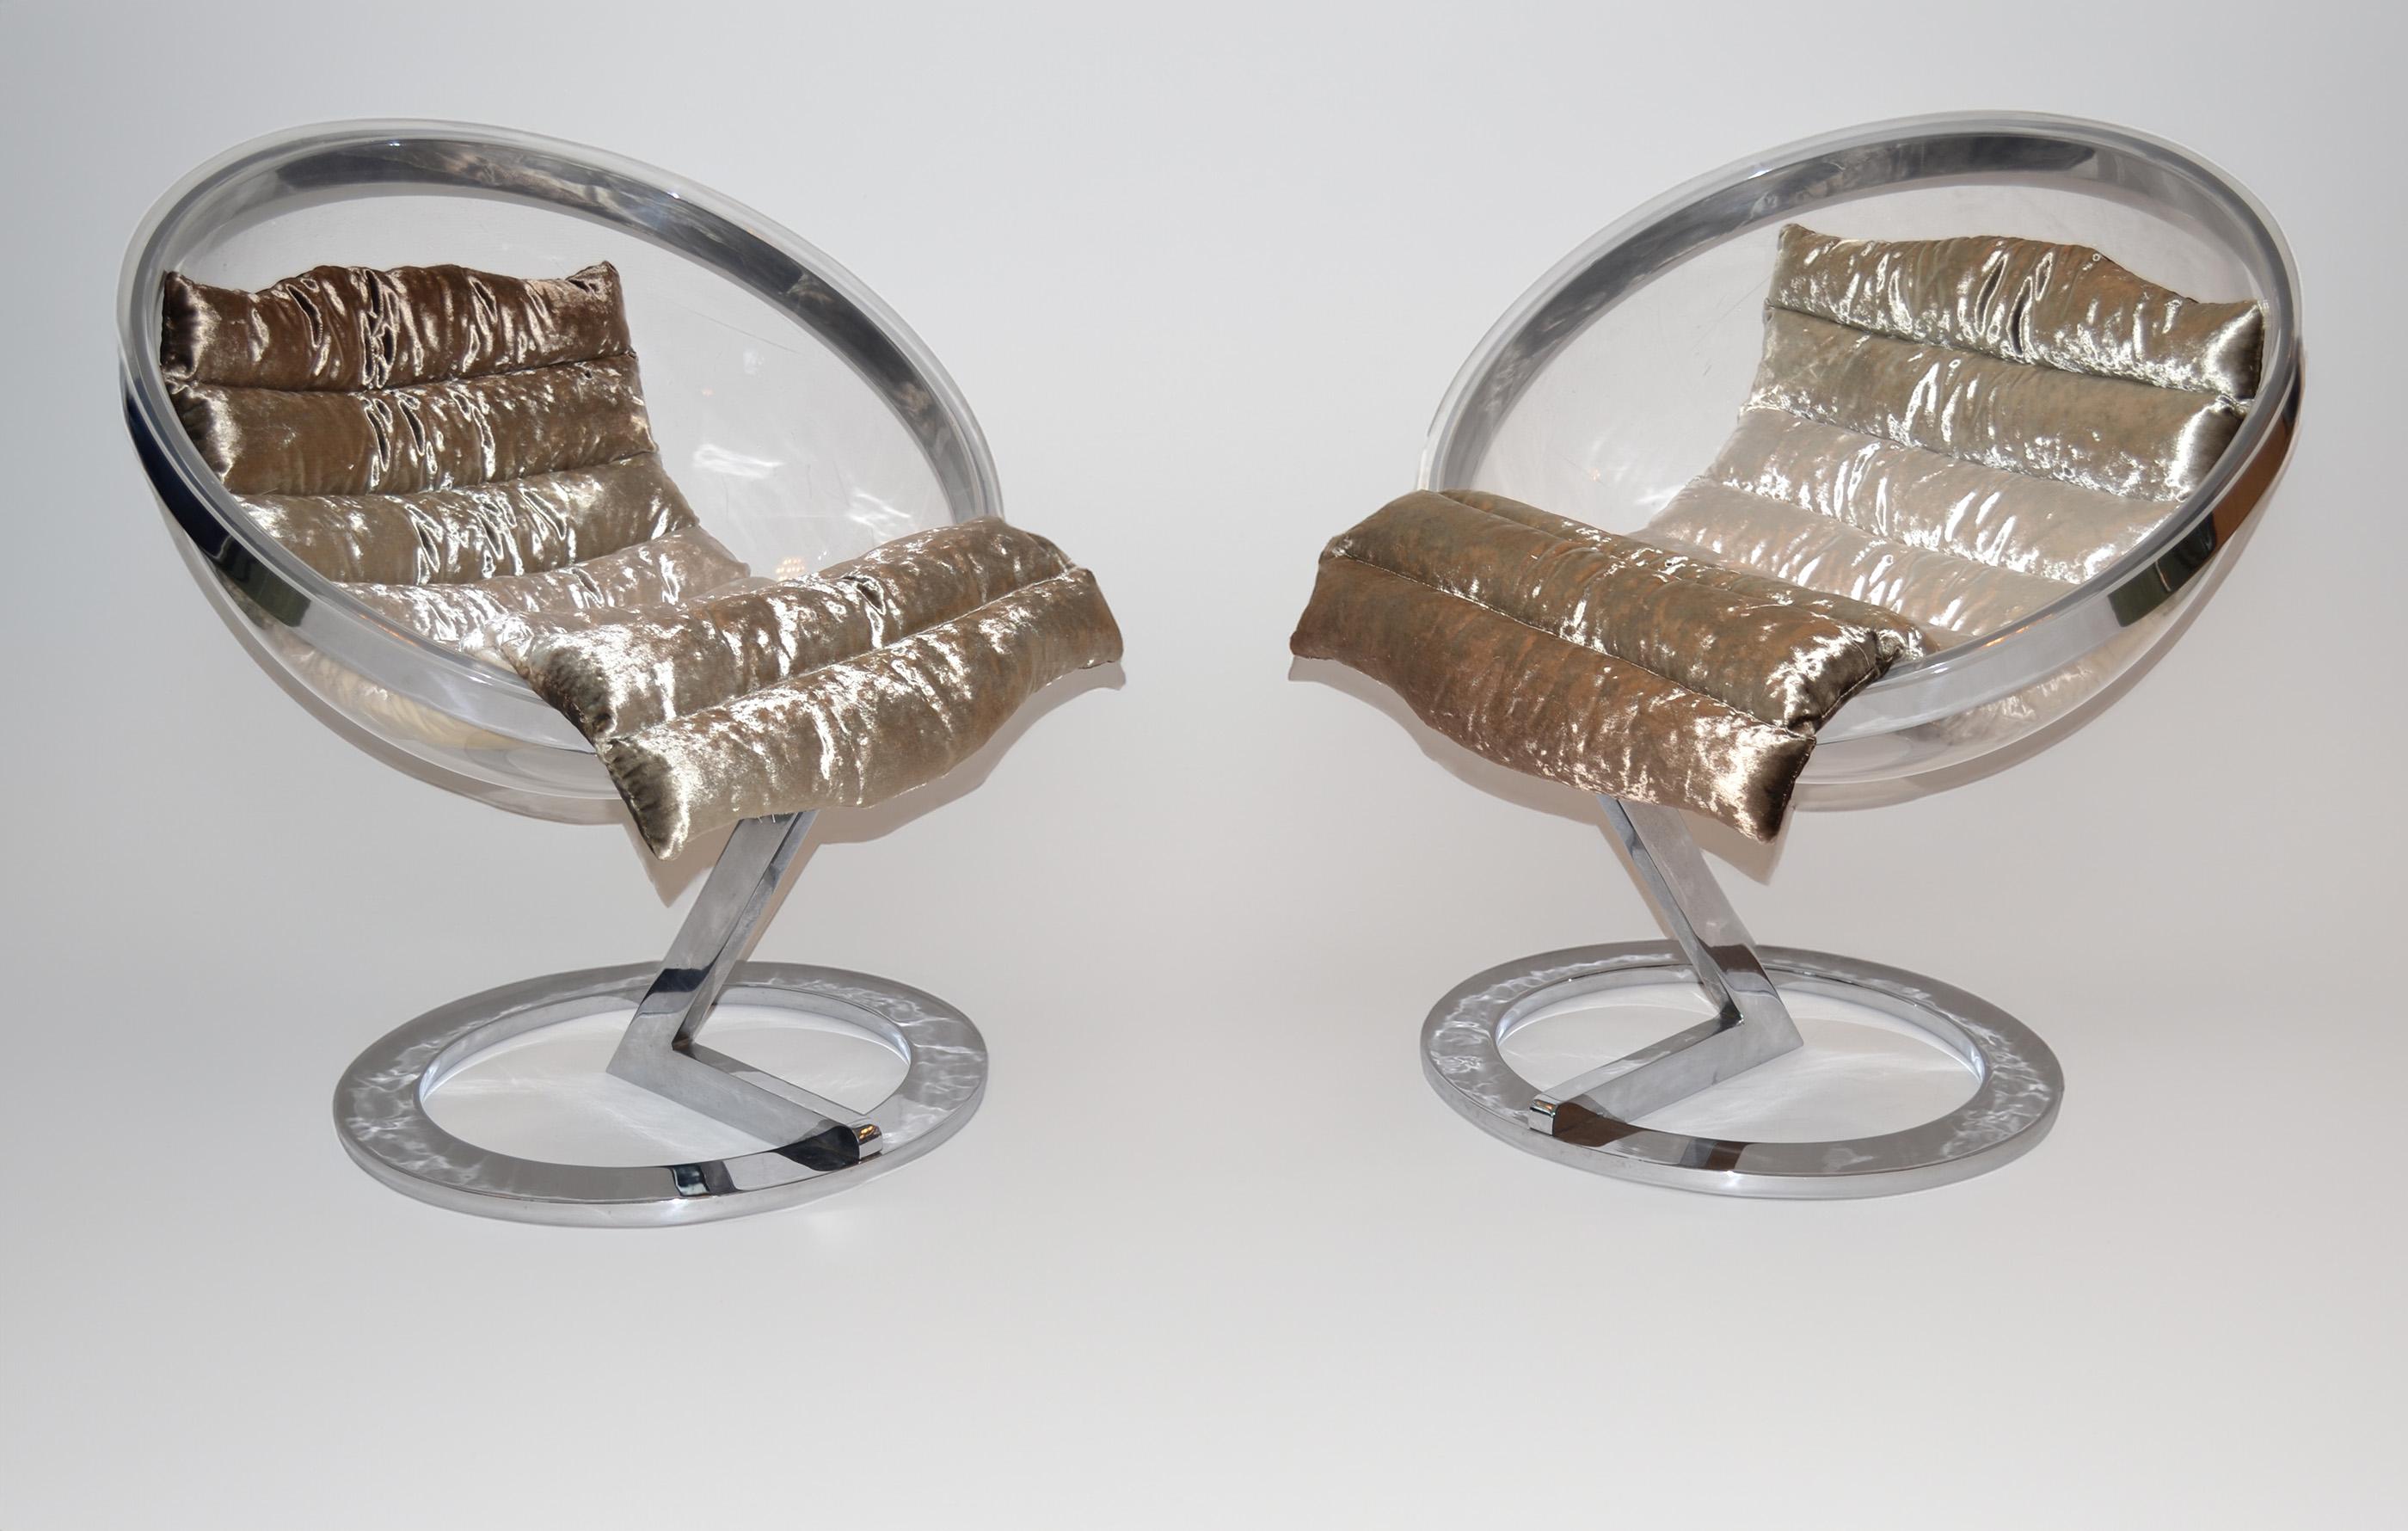 Pair of Space Age Acrylic and Steel Bubble Lounge Chairs after Daninos, 70s 
Pair of Rare Lucite Cantilever Chairs after Christian Daninos, Italy 1970s
Space age design in sculptural bubble form; the half-sphere in plexiglass/lucite/acrylic is